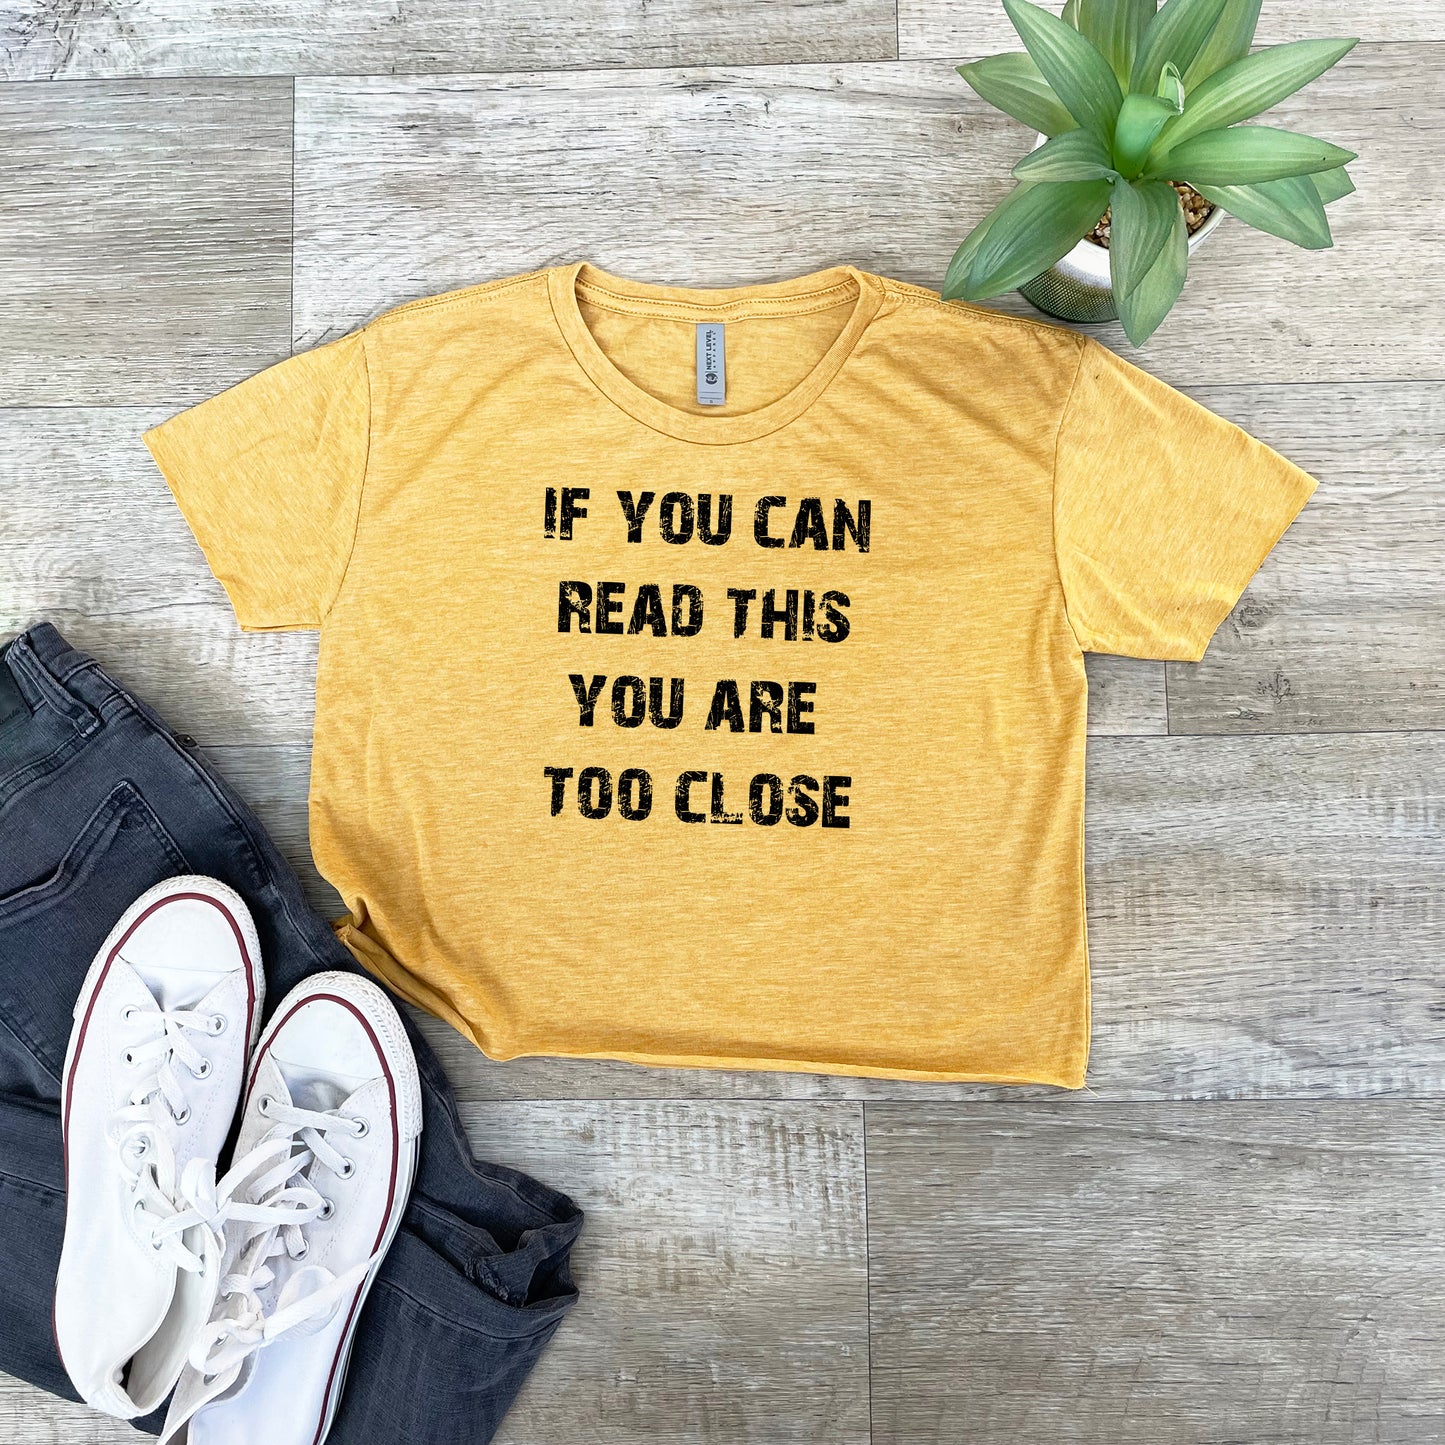 If You Can Read This You Are Too Close - Women's Crop Tee - Heather Gray or Gold